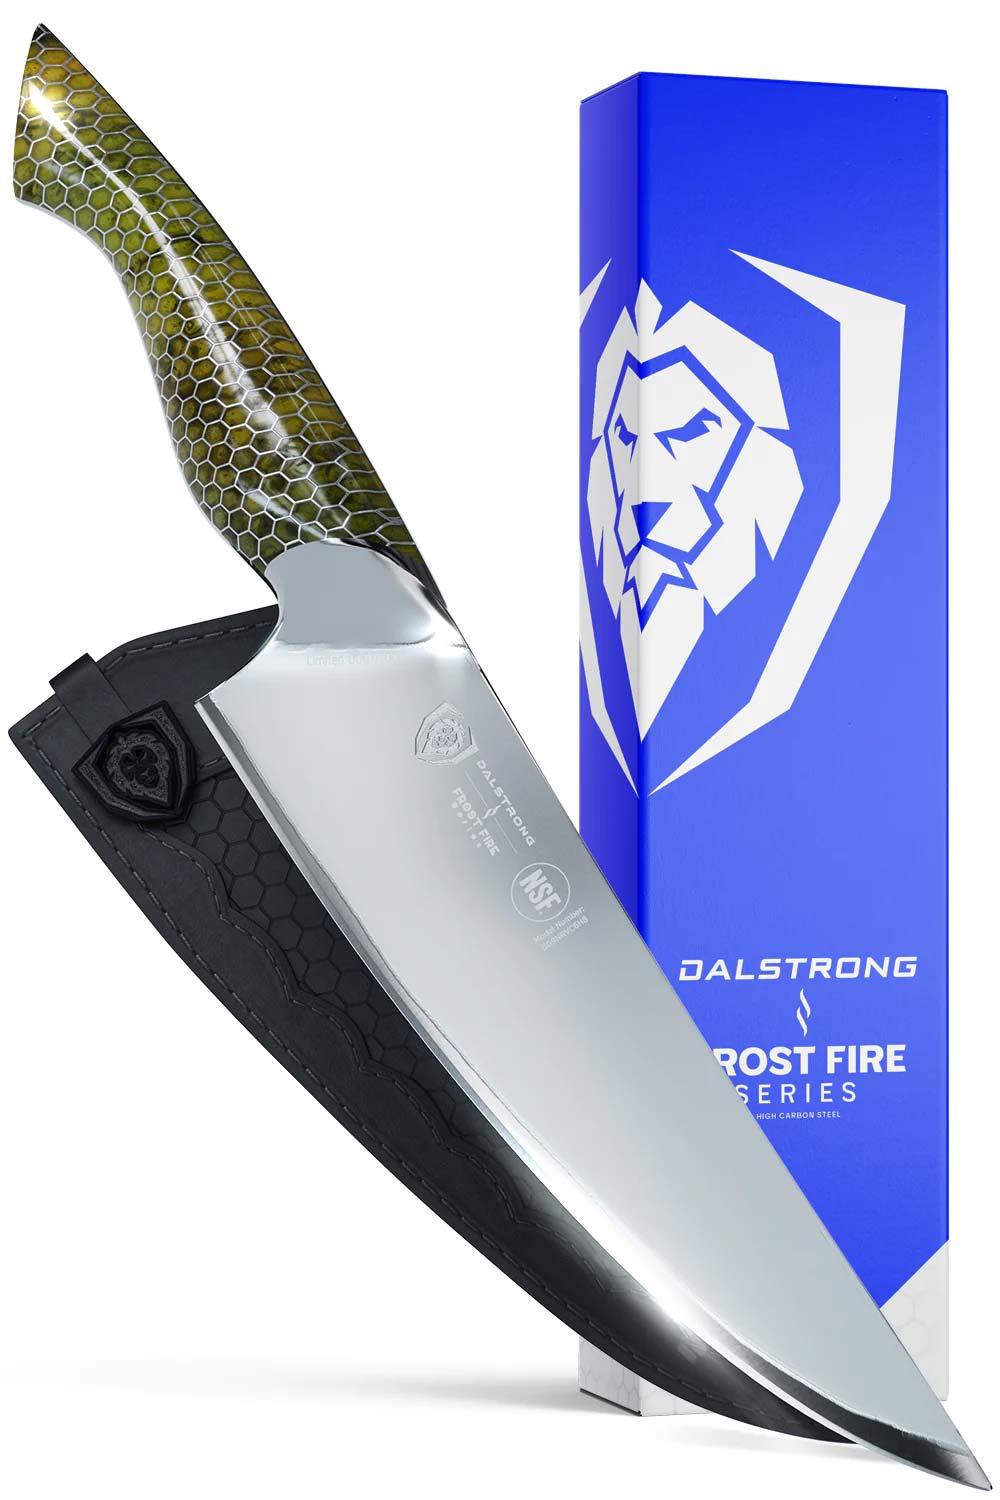 Dalstrong frost fire series 8 inch chef knife with dragon skin handle in front of it's premium packaging.